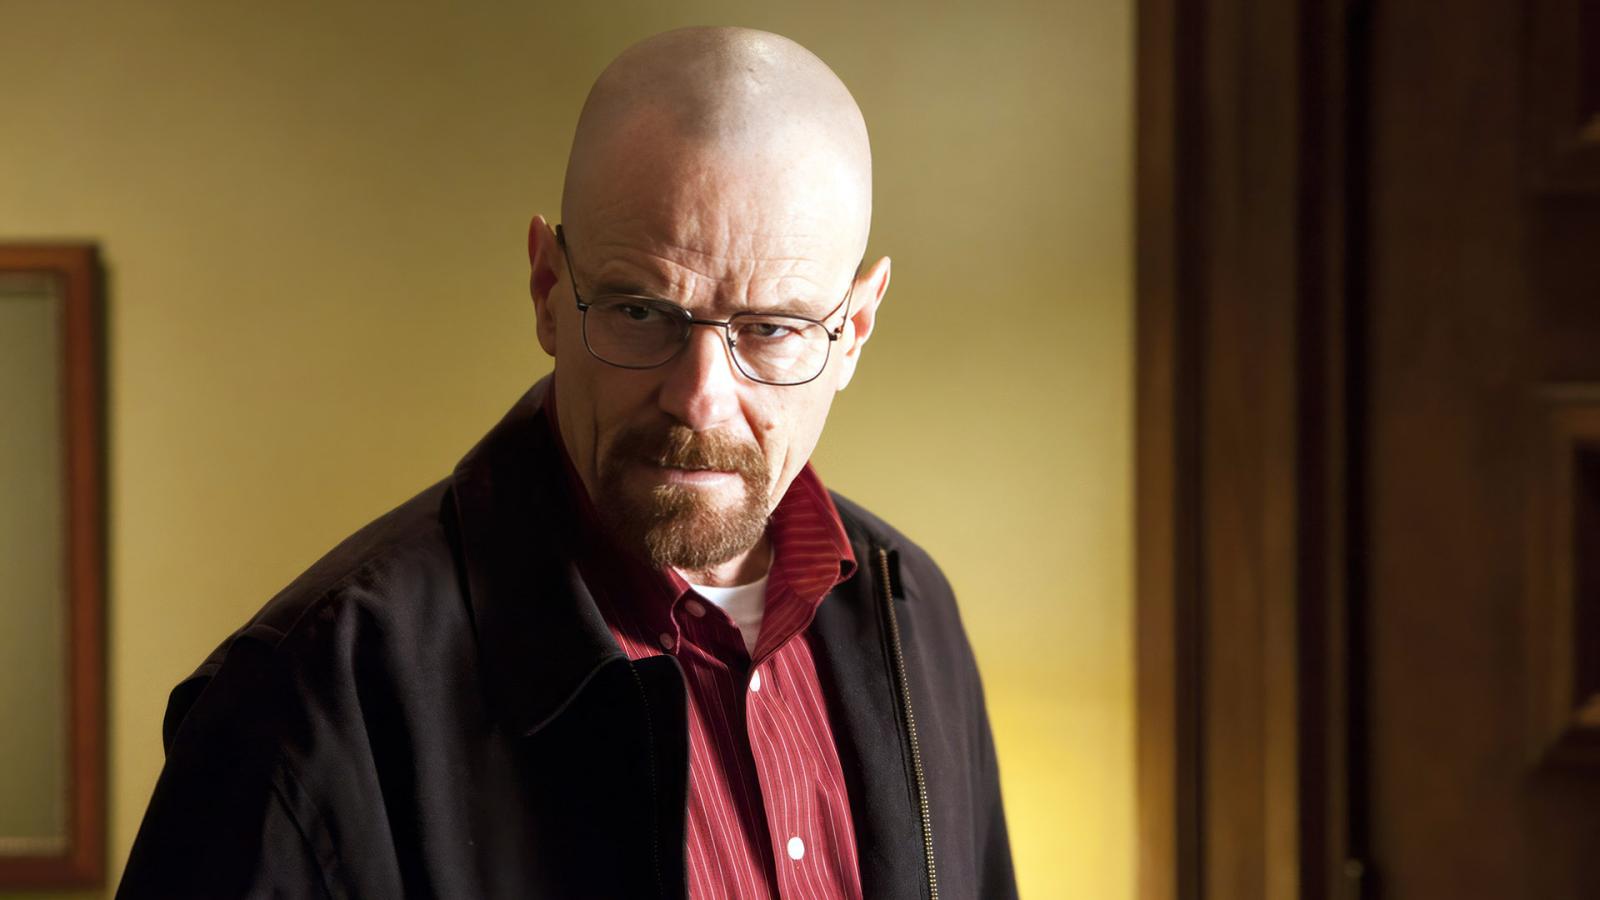 15 Shows With Morally Questionable Main Characters Like Breaking Bad - image 14